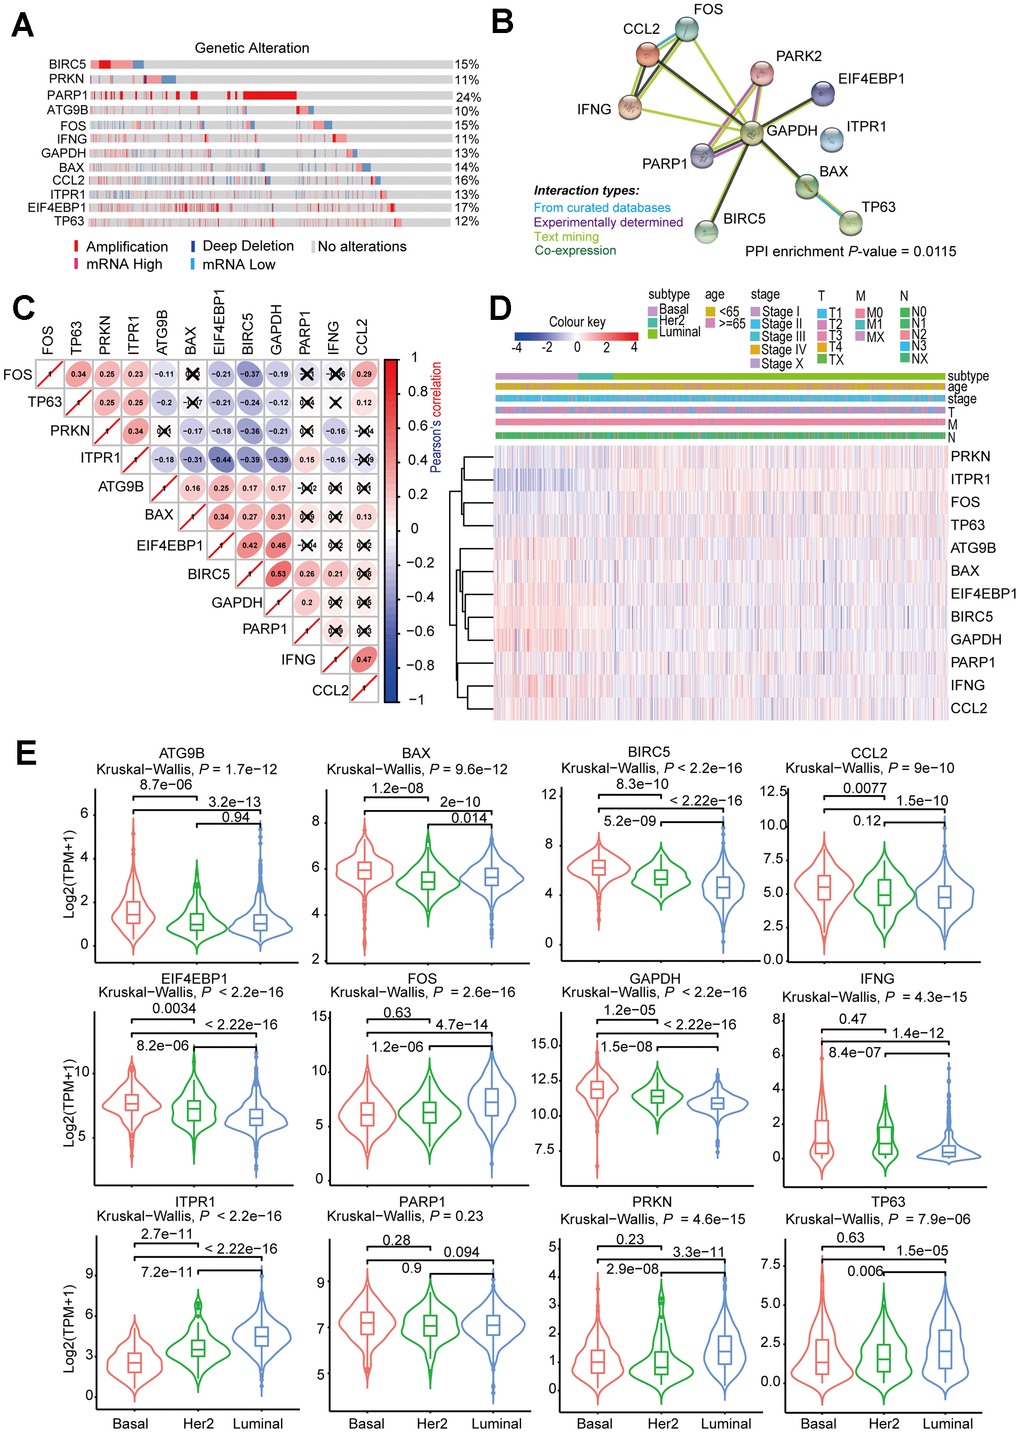 Comprehensive analysis of ARGs in subtype-specific prognostic models. (A) OncoPrint showing the copy number alterations and mRNA expression alterations of 12 ARGs in subtype-specific autophagy prognostic models. The analysis was performed by cBioProtal database using MATABRIC dataset. (B) Protein-protein interaction analysis of genes in subtype-specific autophagy prognostic model by STRING database. (C) Clustered heatmap showing the correlation of genes expression in subtype-specific autophagy prognostic model. The correlation was calculated by Pearson’s correlation using log2 (TPM+1). Not statistically significant correlations were defined as P > 0.05 and marked by a black cross. (D) Clustered heatmap showing the genes expression and clinical information in BRCA patients. (E) Violin plots showing identified gene expression in Luminal, Her-2 and Basal-like BRCA. The P values were calculated by Wilcox-test (two groups comparison) and Kruskal-Wallis test (three groups comparison).